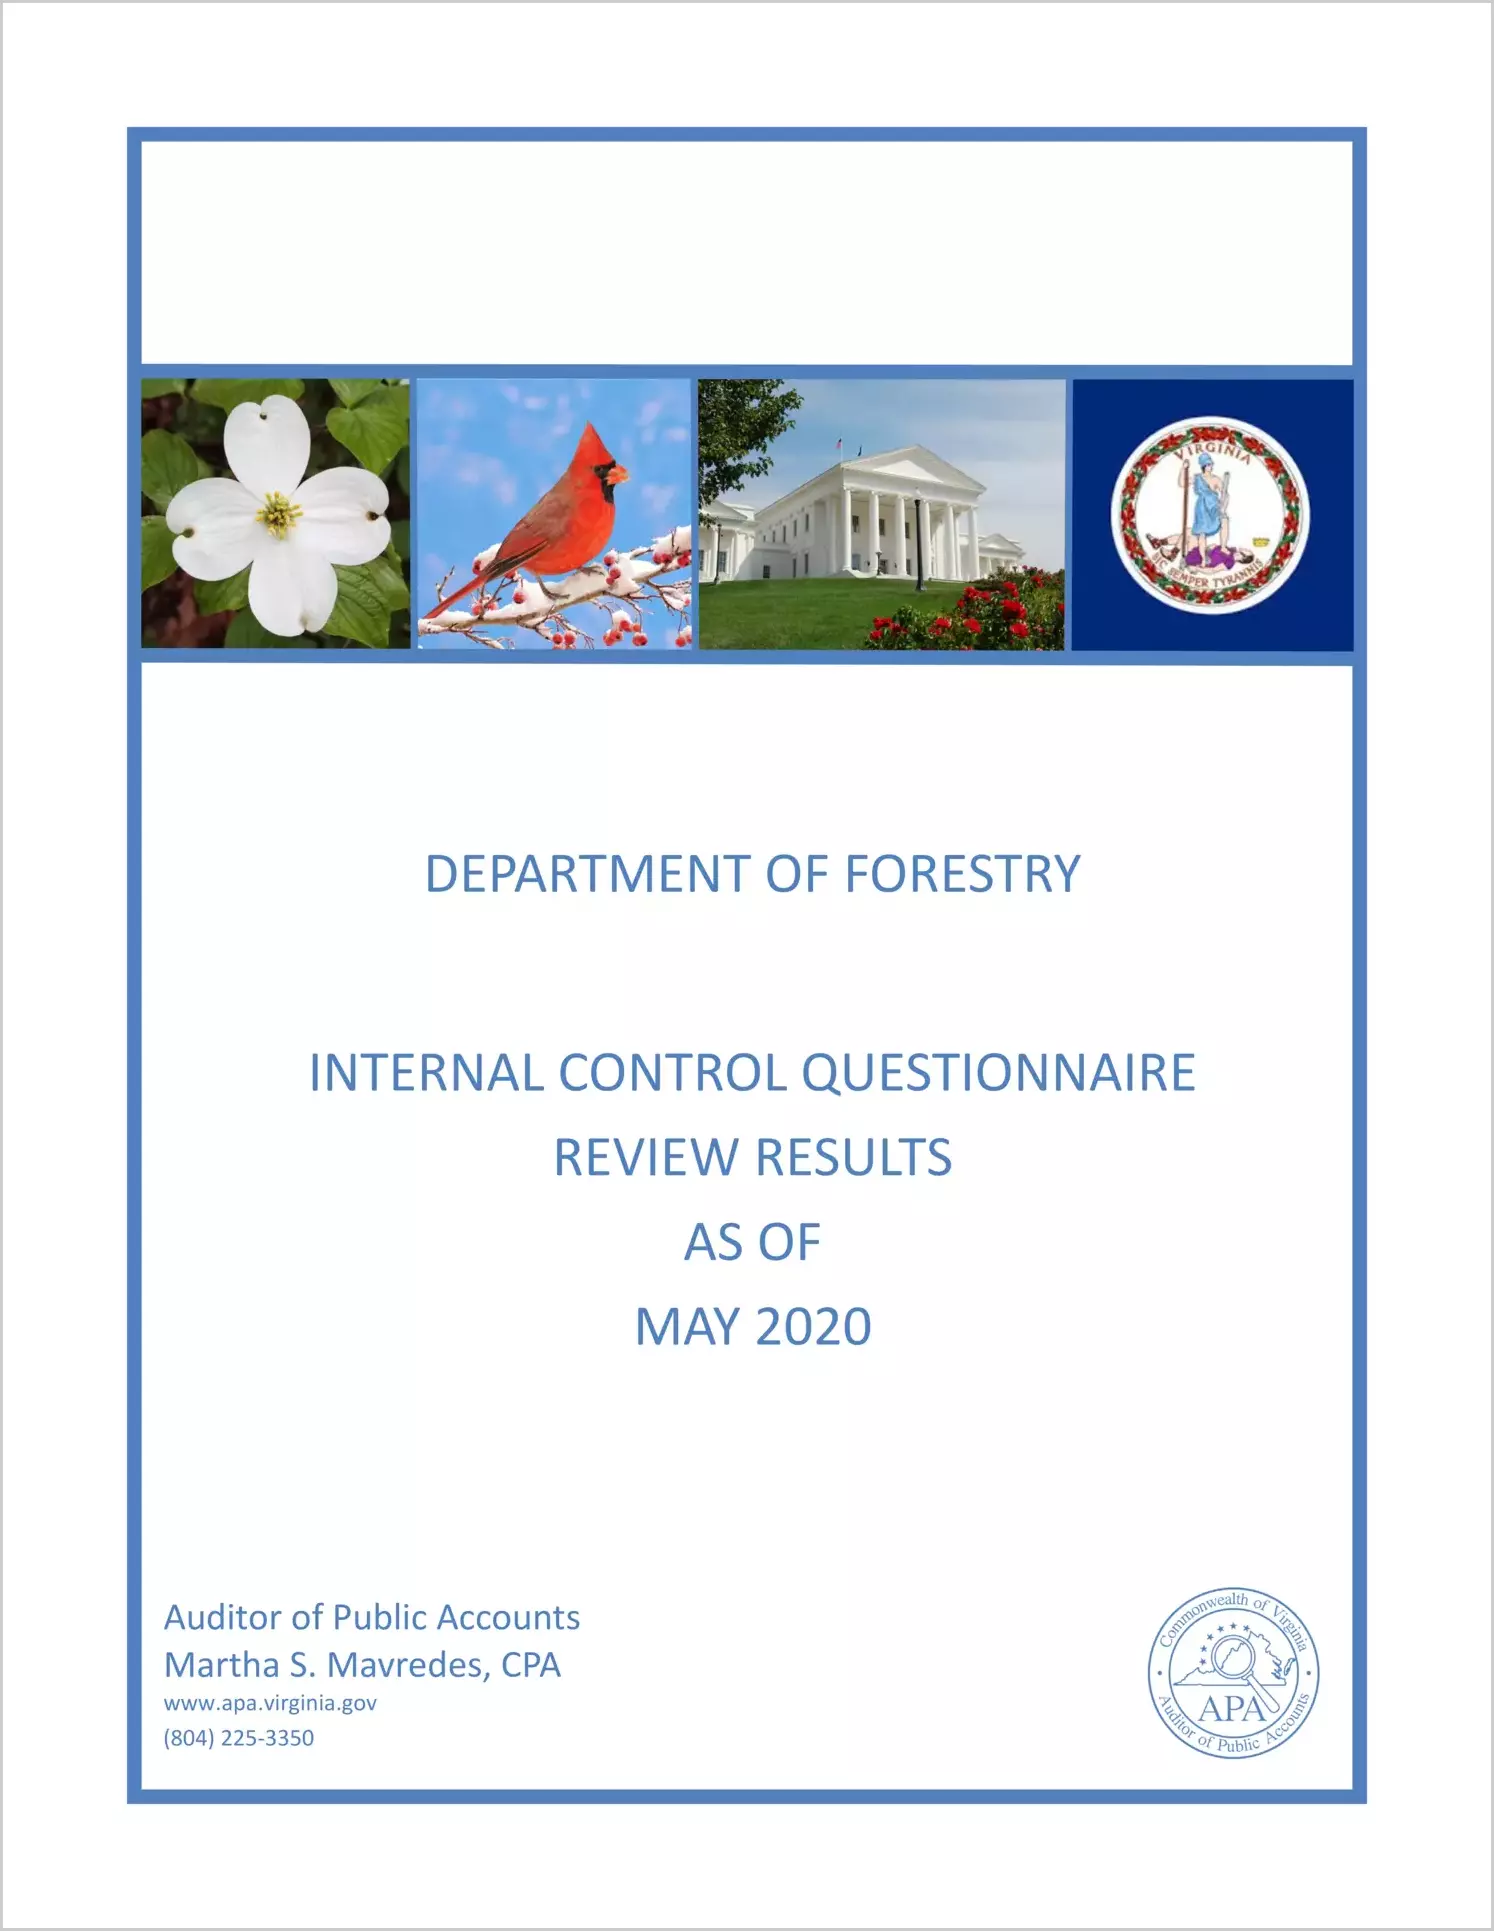 Department of Forestry Internal Control Questionnaire Review Results as of May 2020